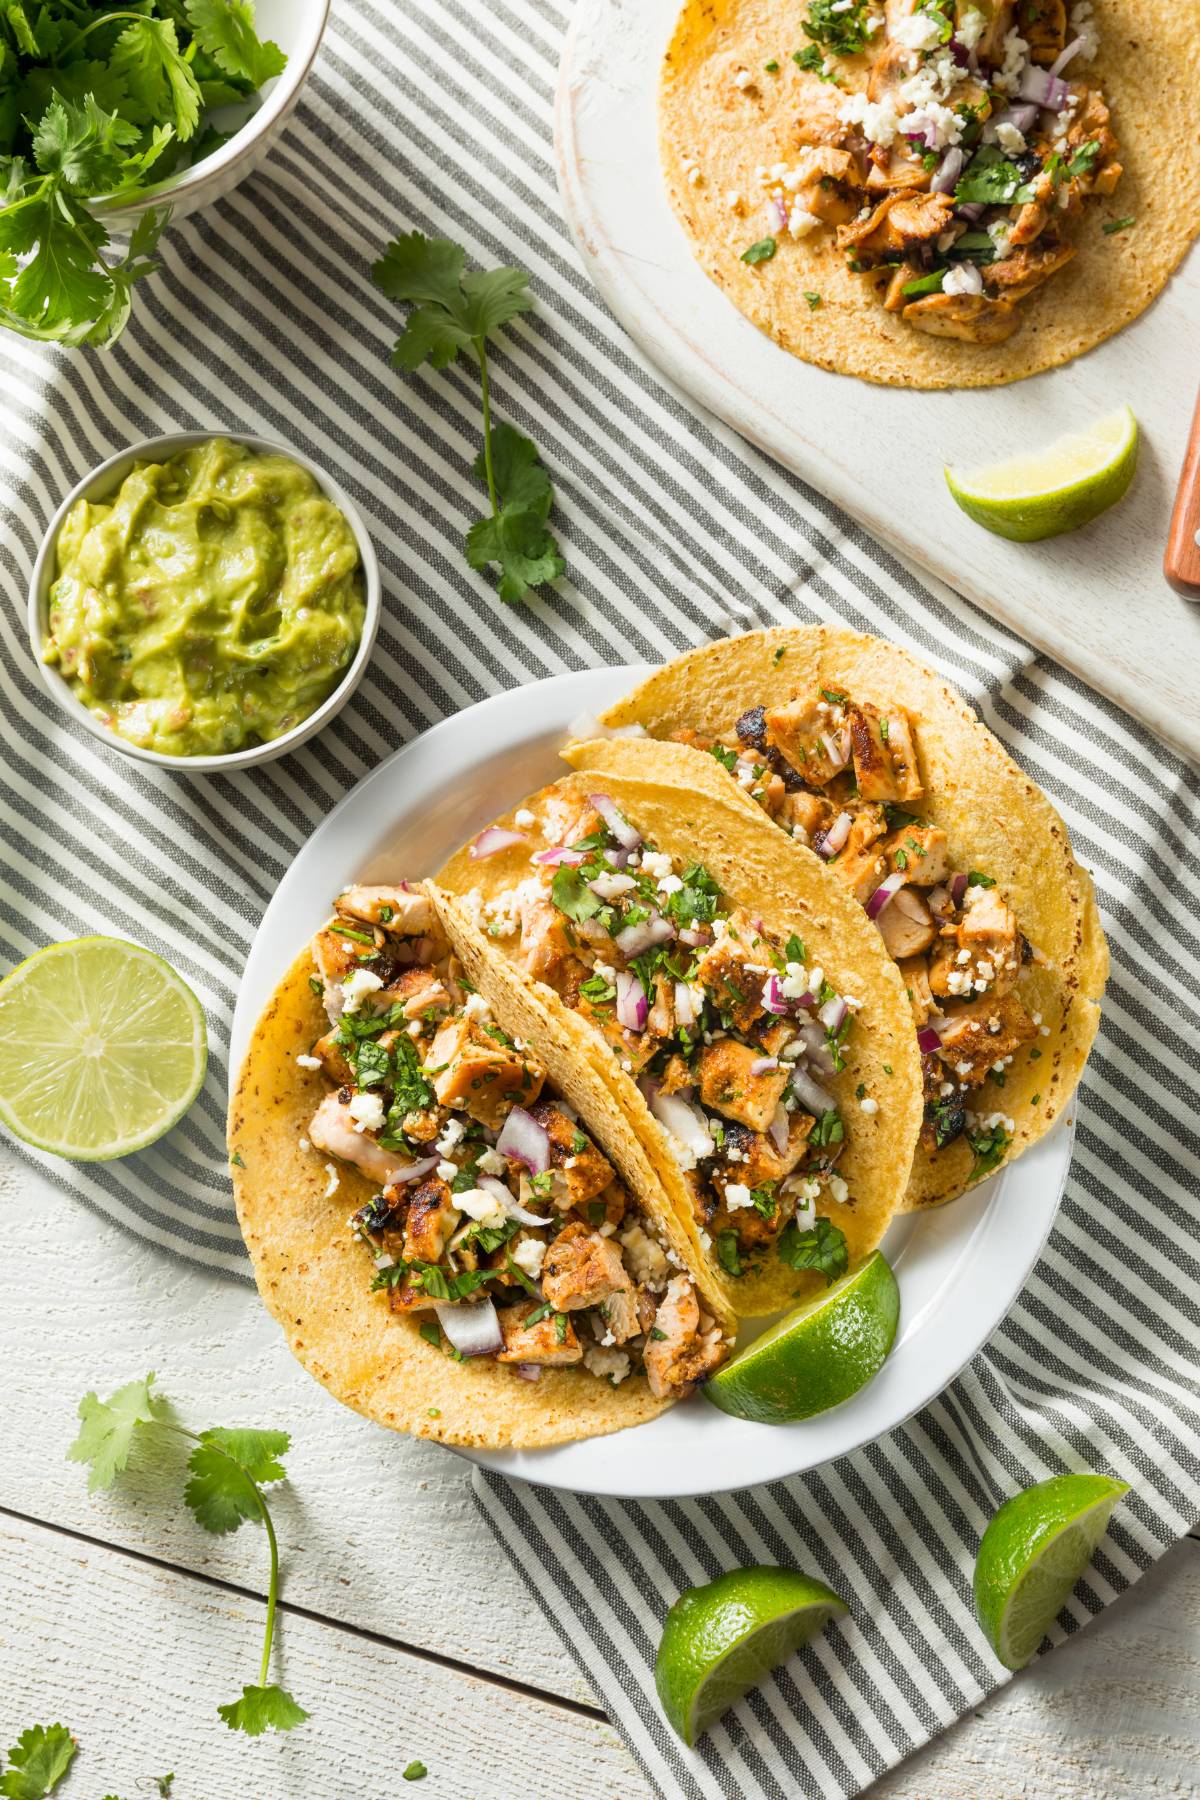 Easy Taco Recipes For Your Next Event: 15 Quick + Delicious Ideas